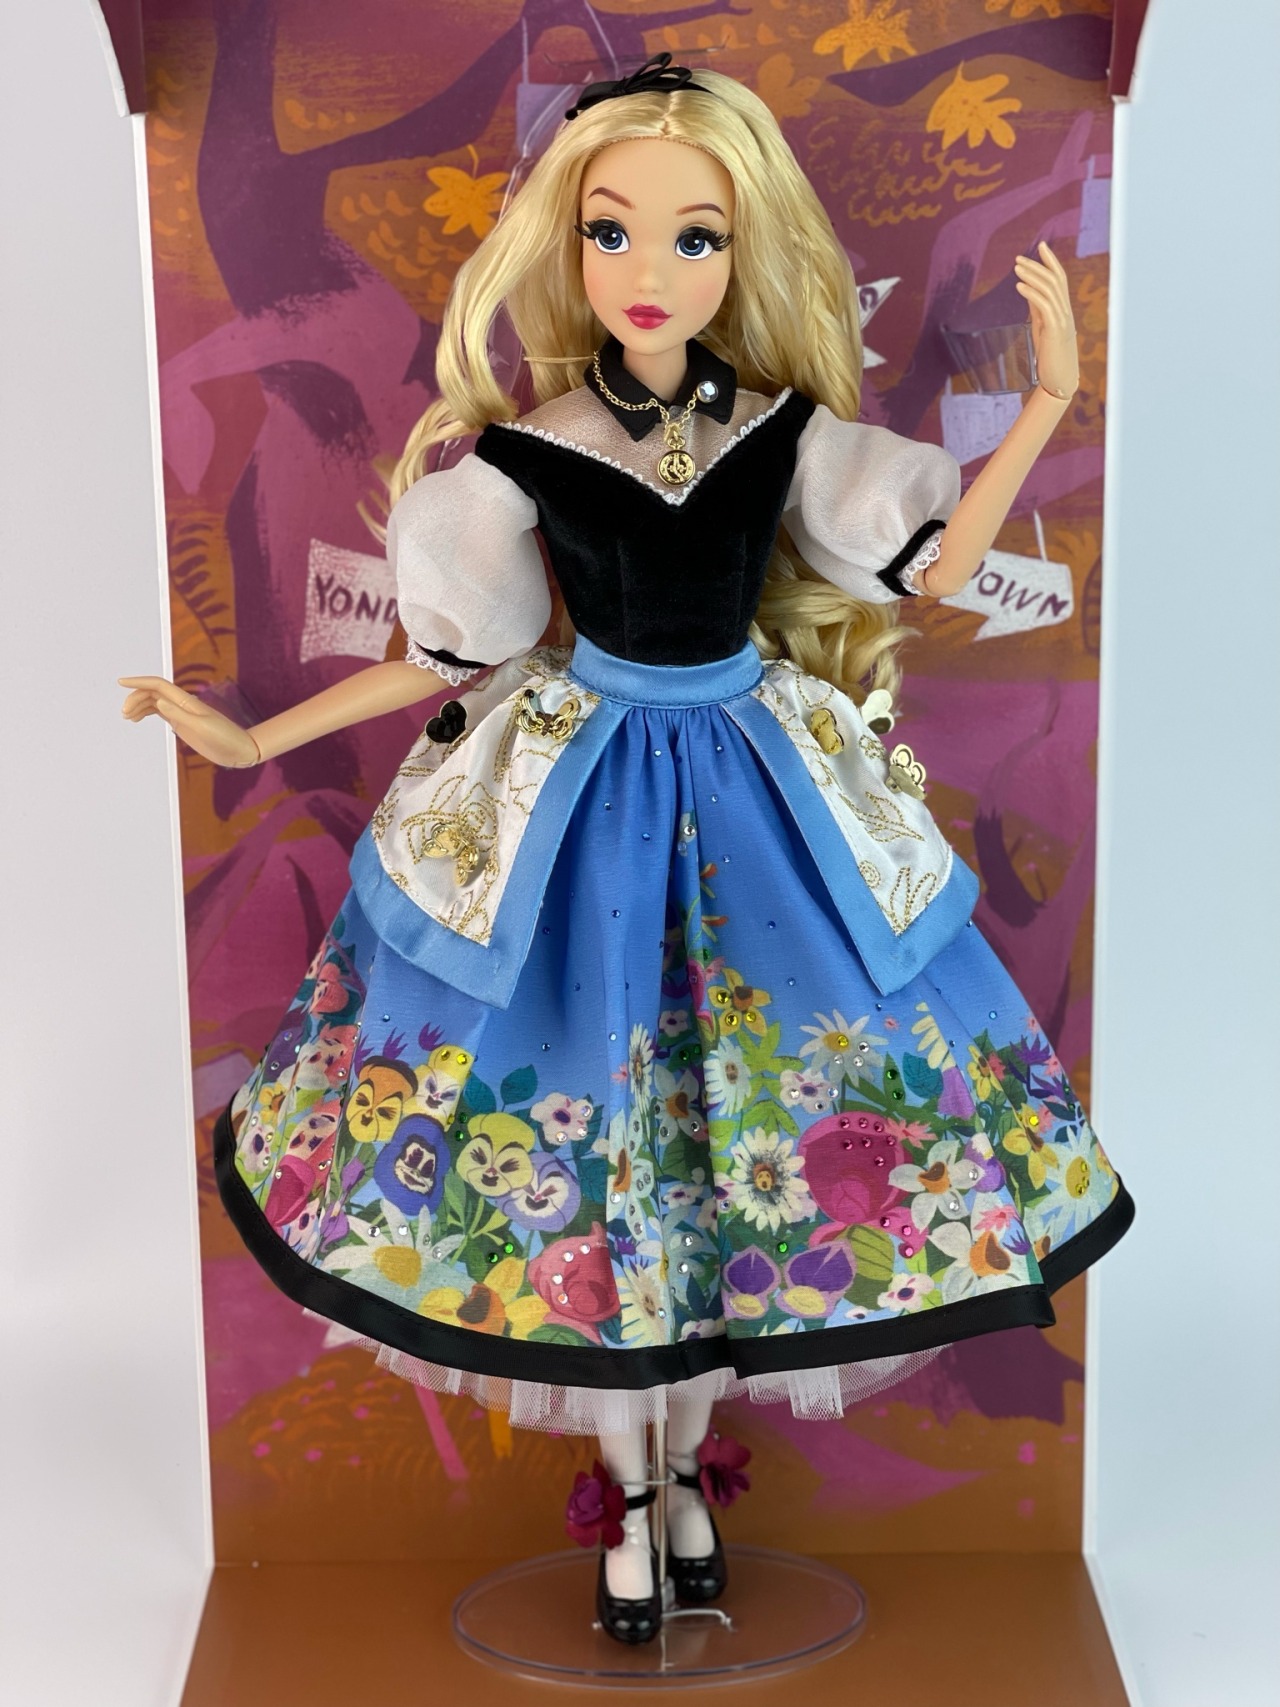 Alice in Wonderland art by Mary Blair Limited Edition Doll